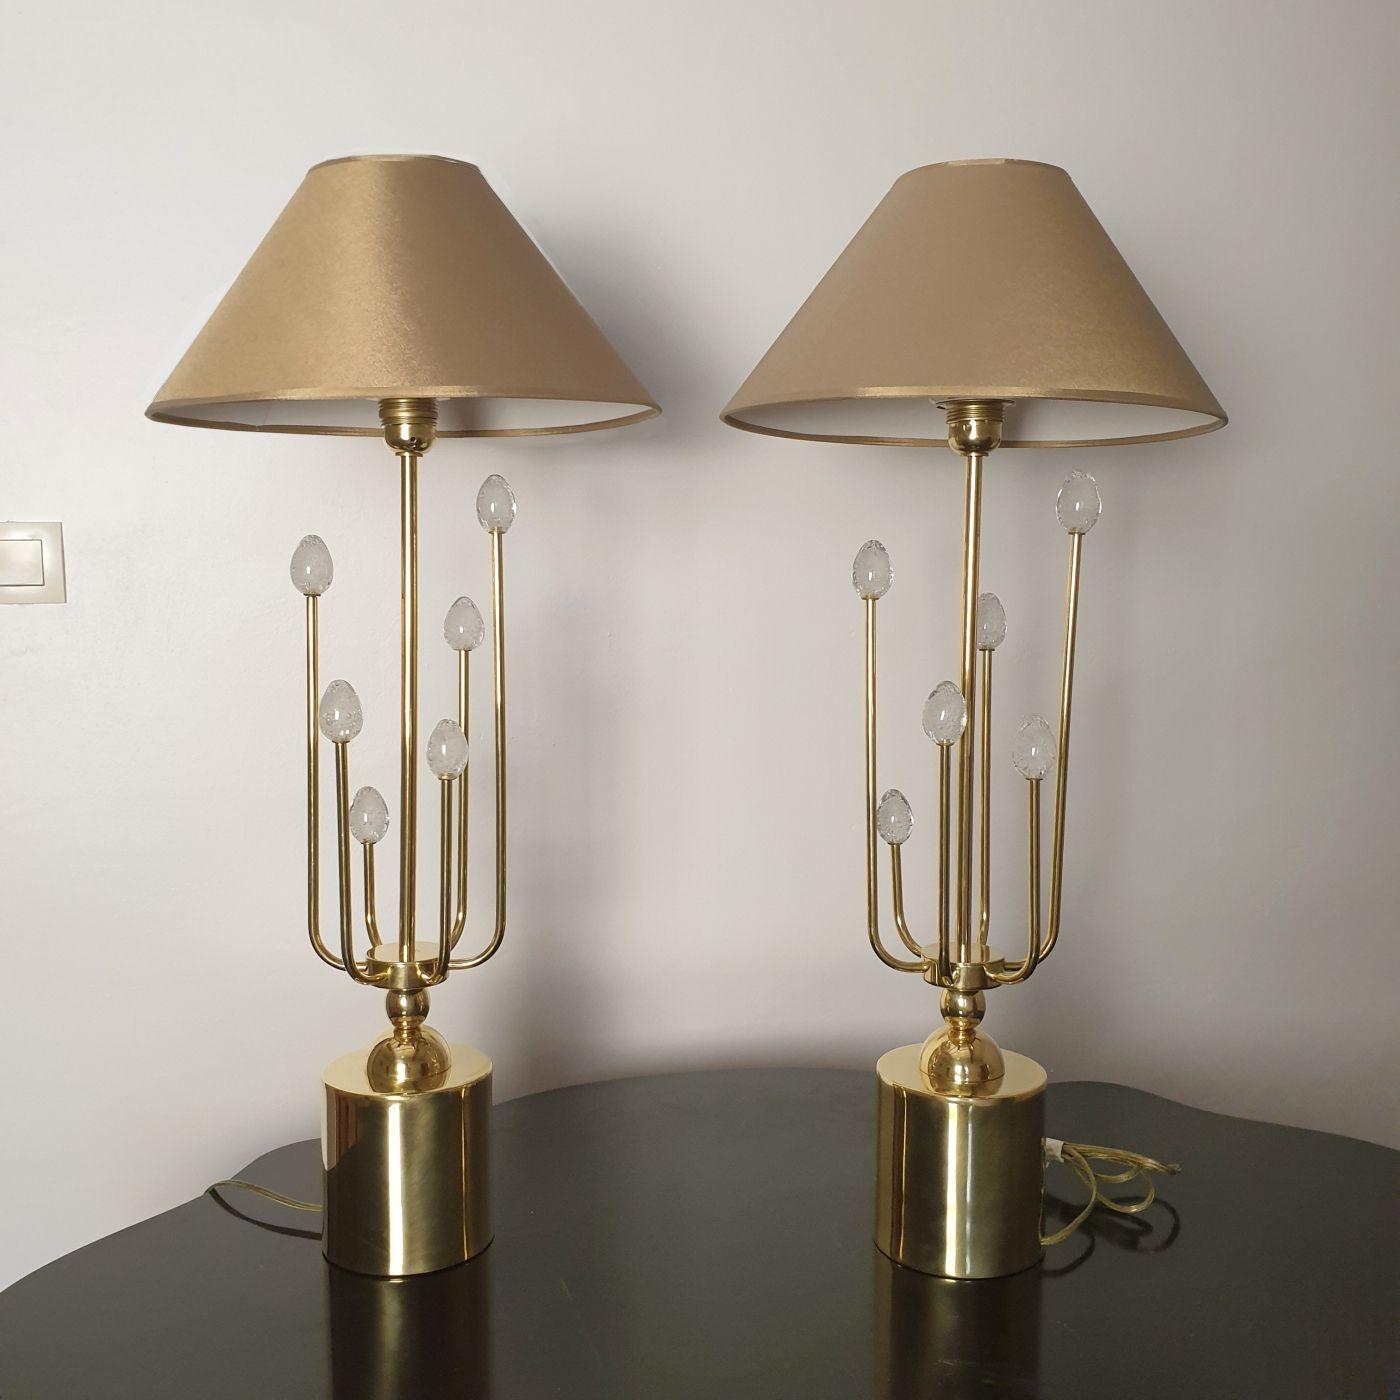 Pair of Mid Century Modern table lamps, attributed to Sciolari, Italy 1970s.
The pair of lamps is entirely made of polished brass.
Each lamp has 6 brass decorative stems, with various heights; each one has a Murano glass egg finial.
The Murano eggs